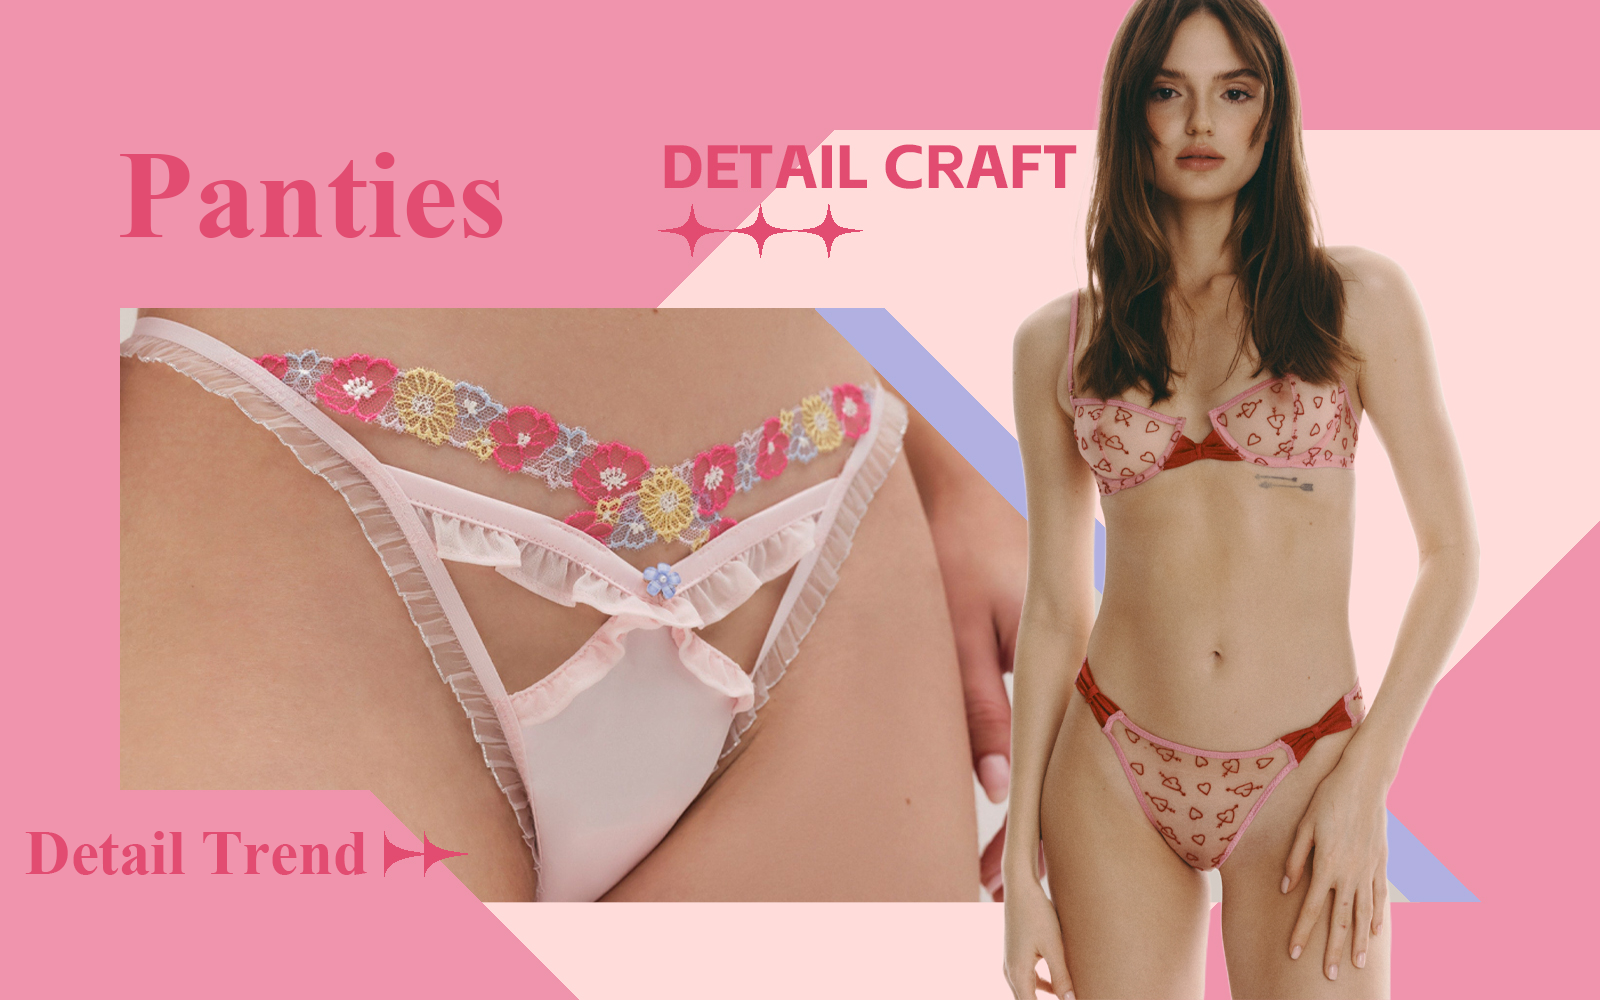 The Detail & Craft Trend for Panties